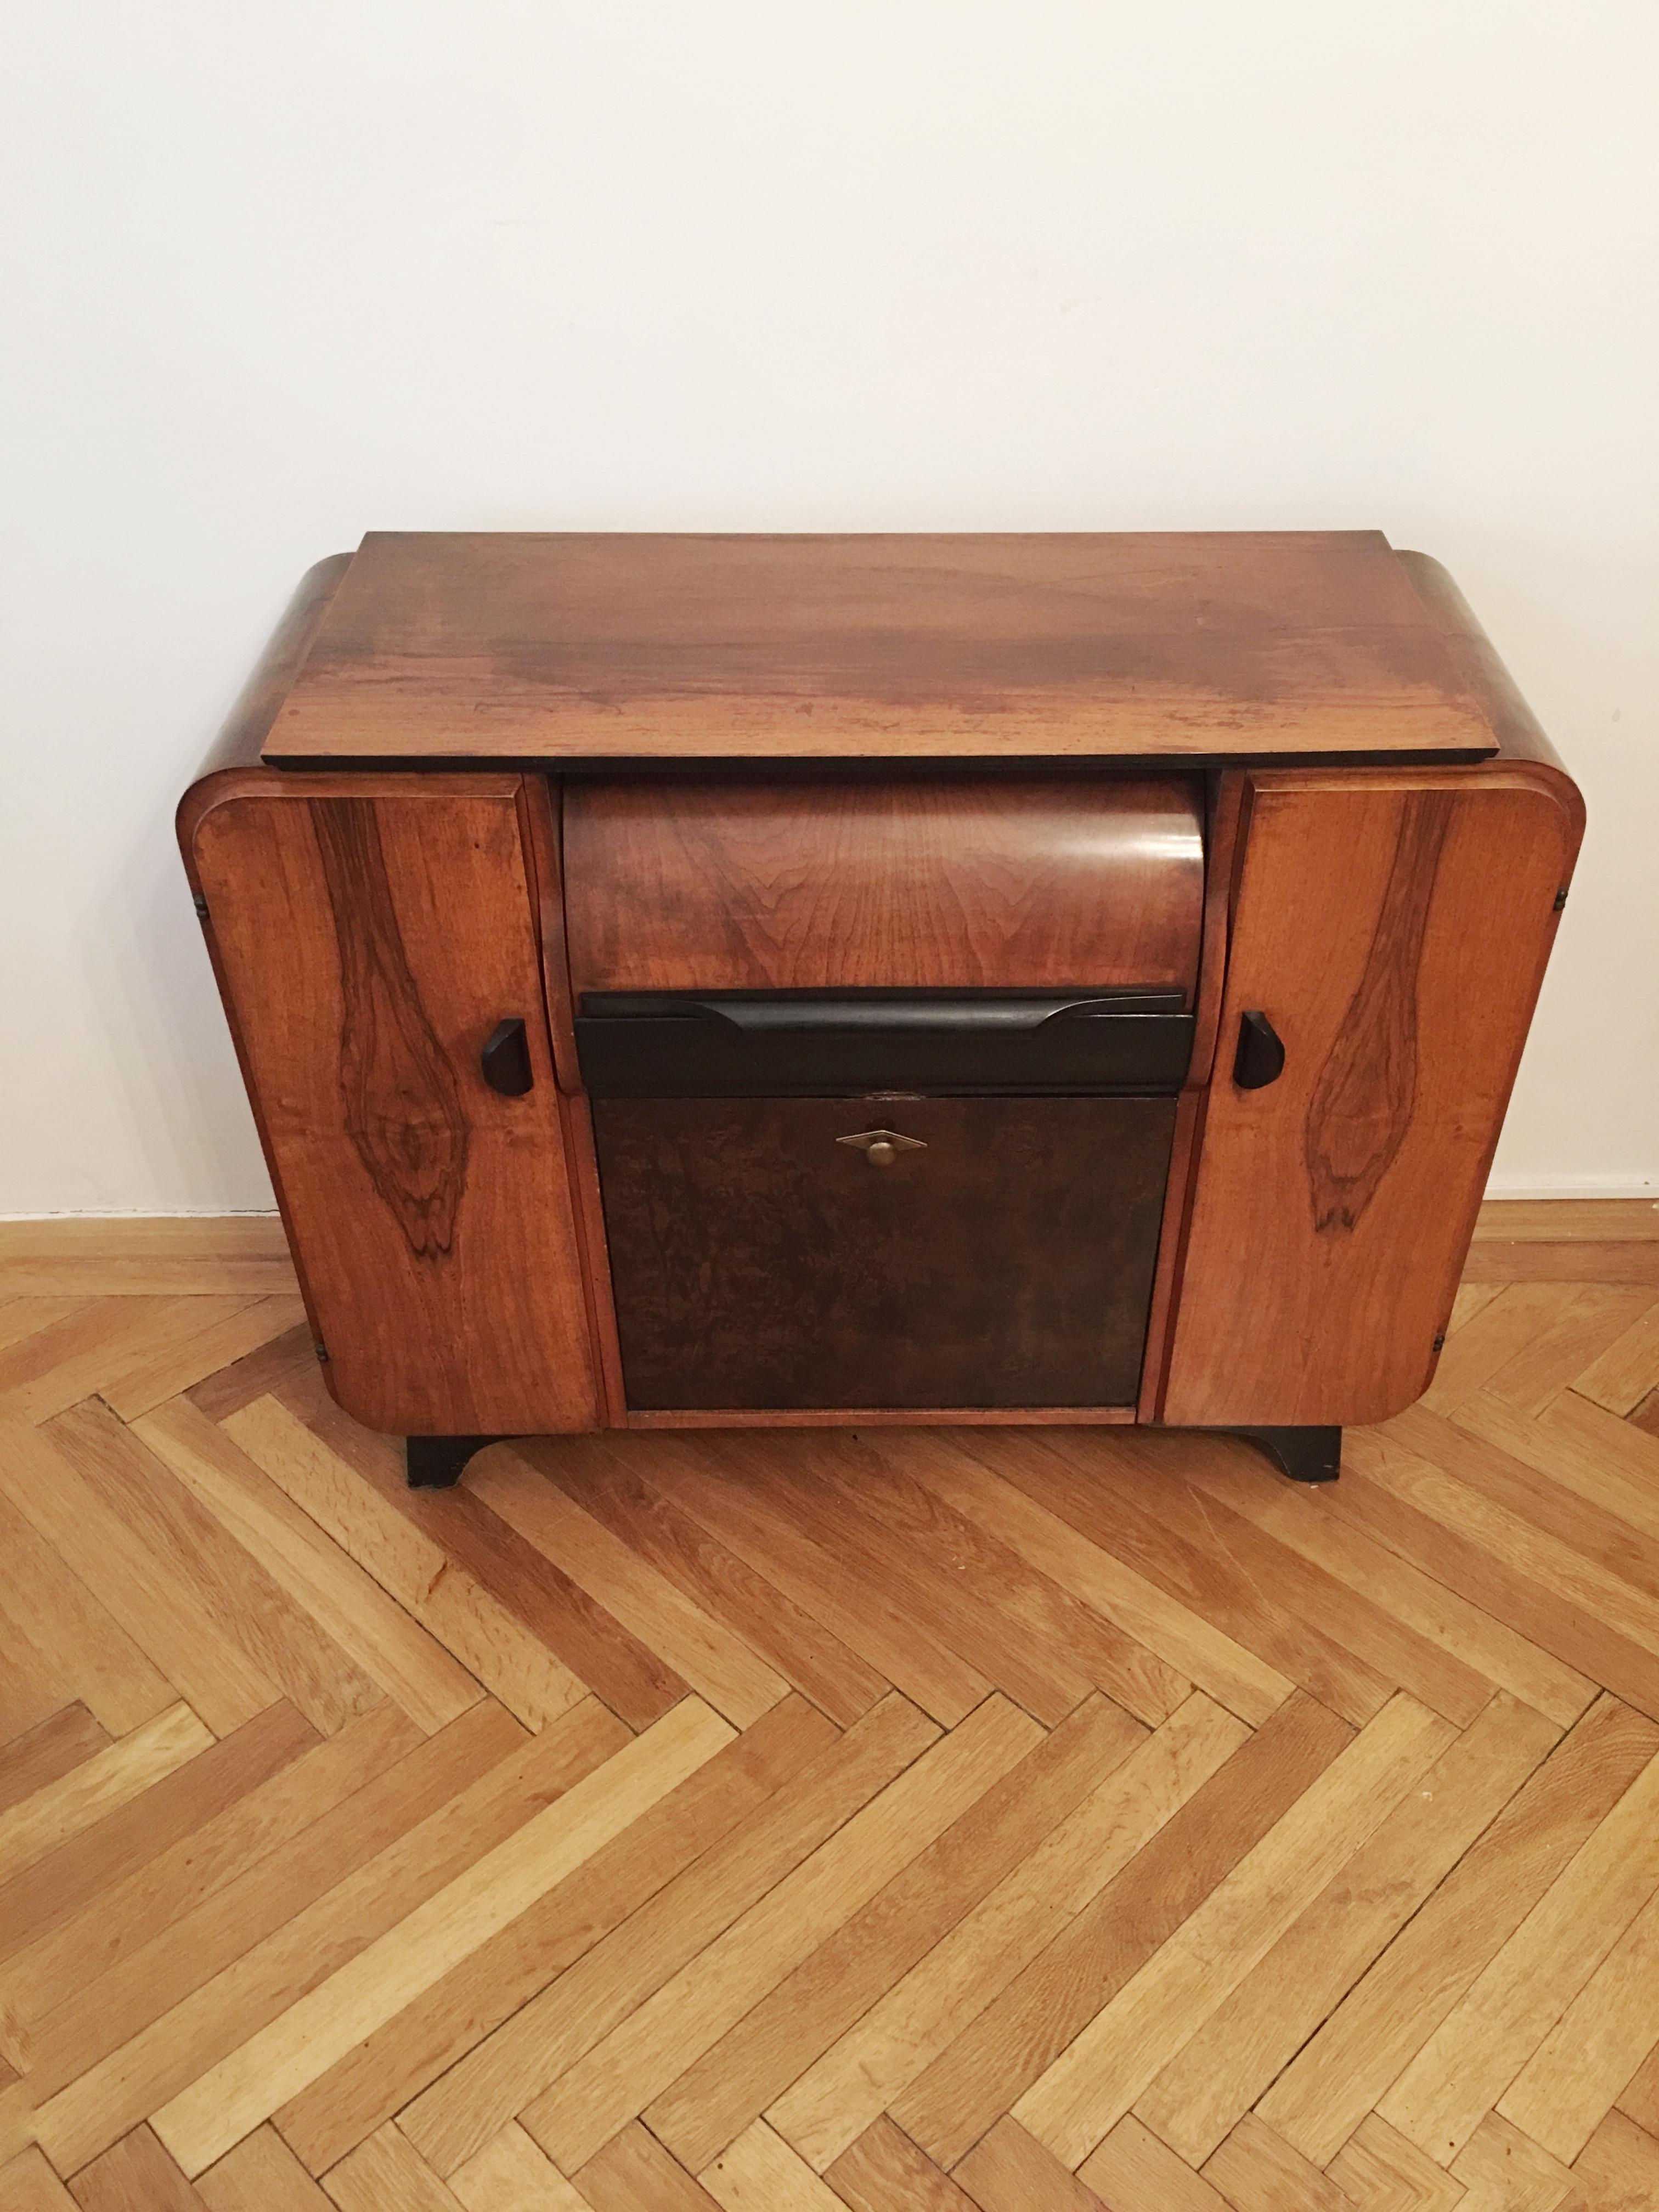 This music cabinet was designed by Jindrich Halabala in the 1930s, but due to its popularity stayed in production until 1960s. The cabinet was designed to house a record player and its records.